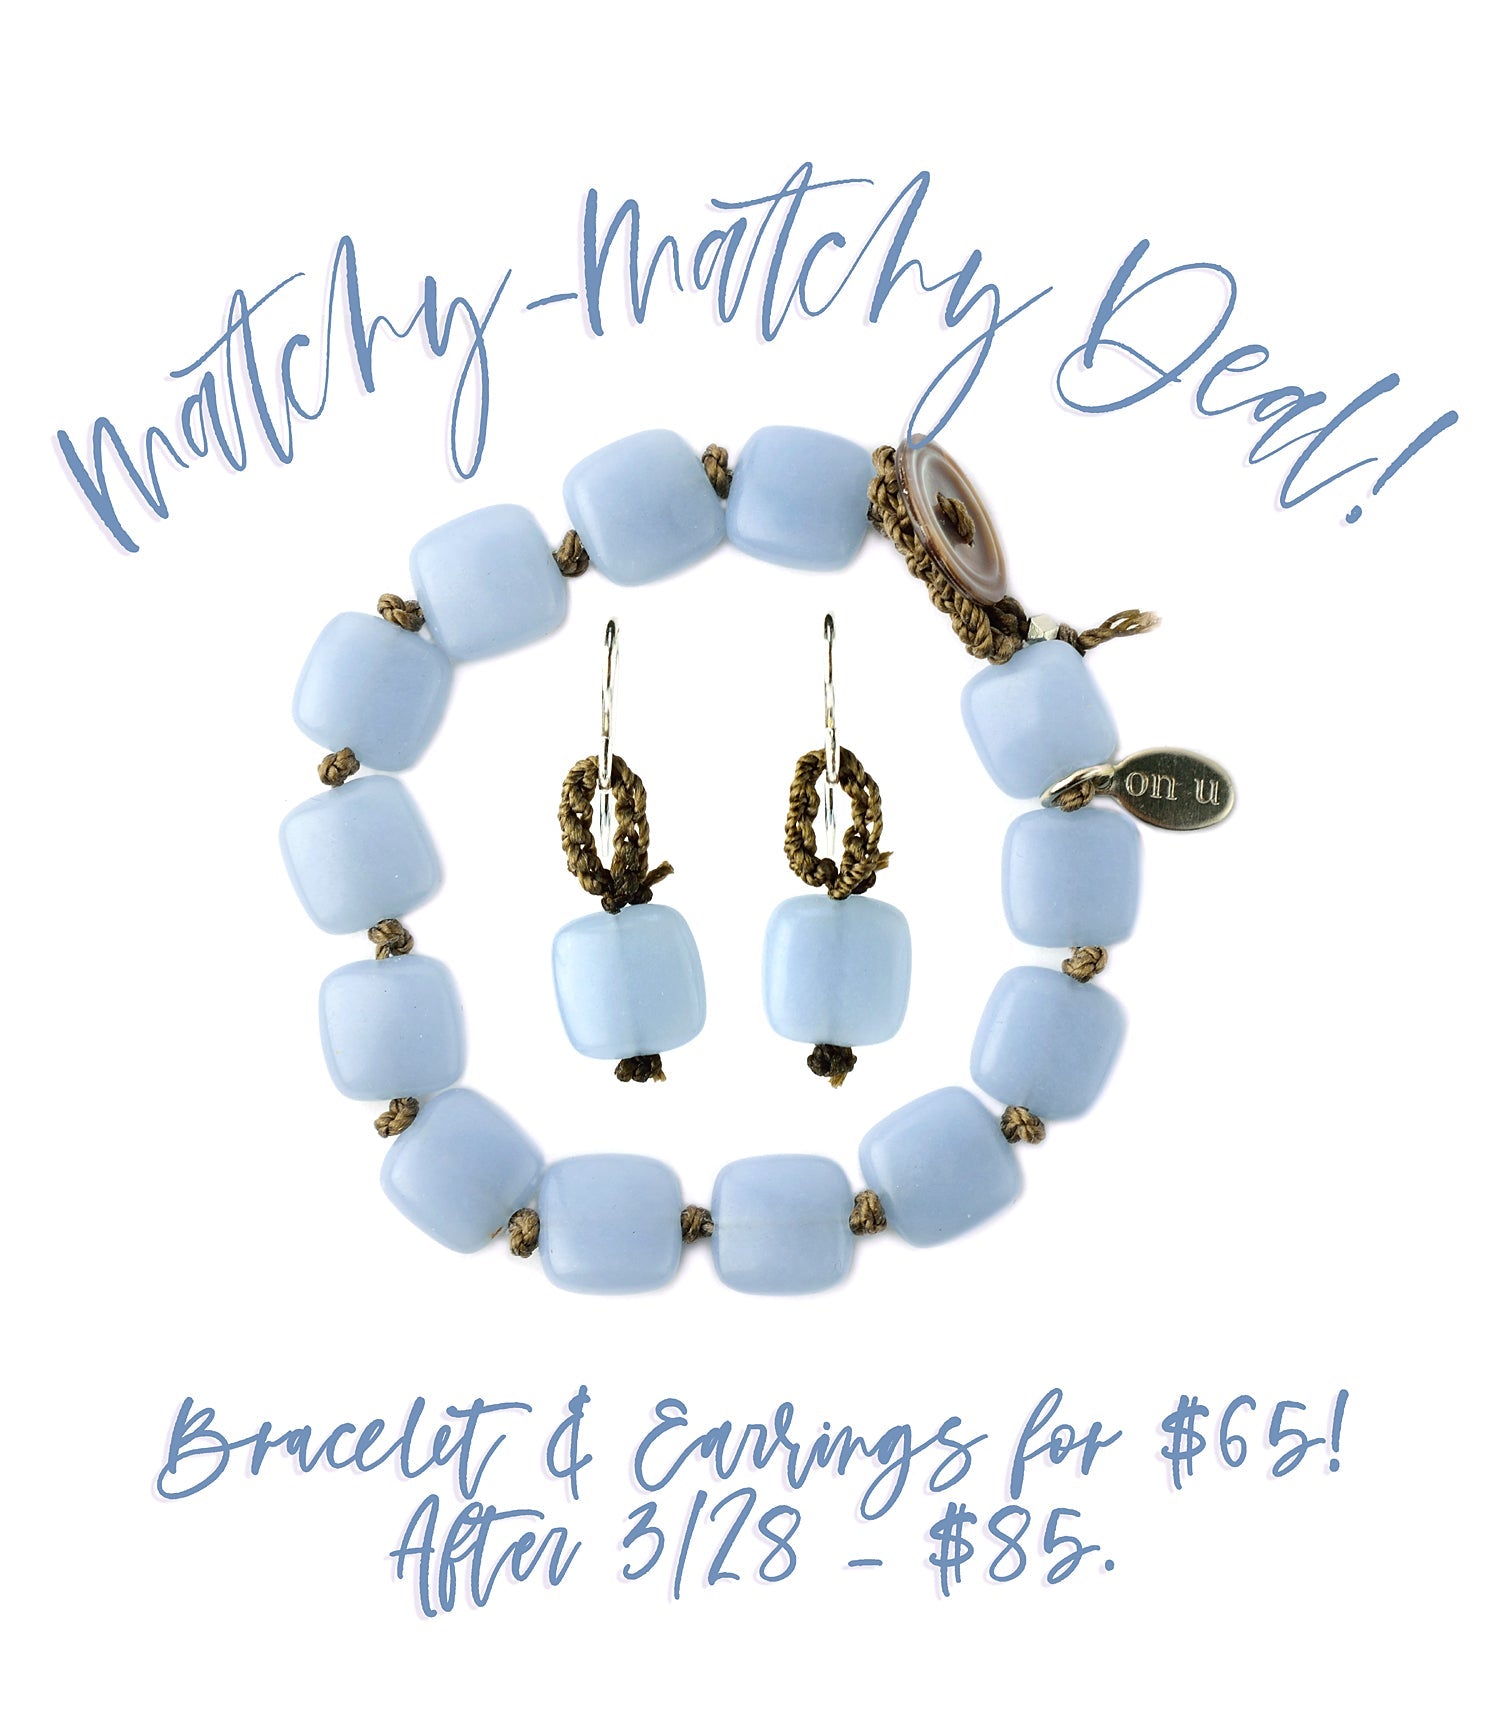 Matchy-Matchy Special Offer - On U Jewelry